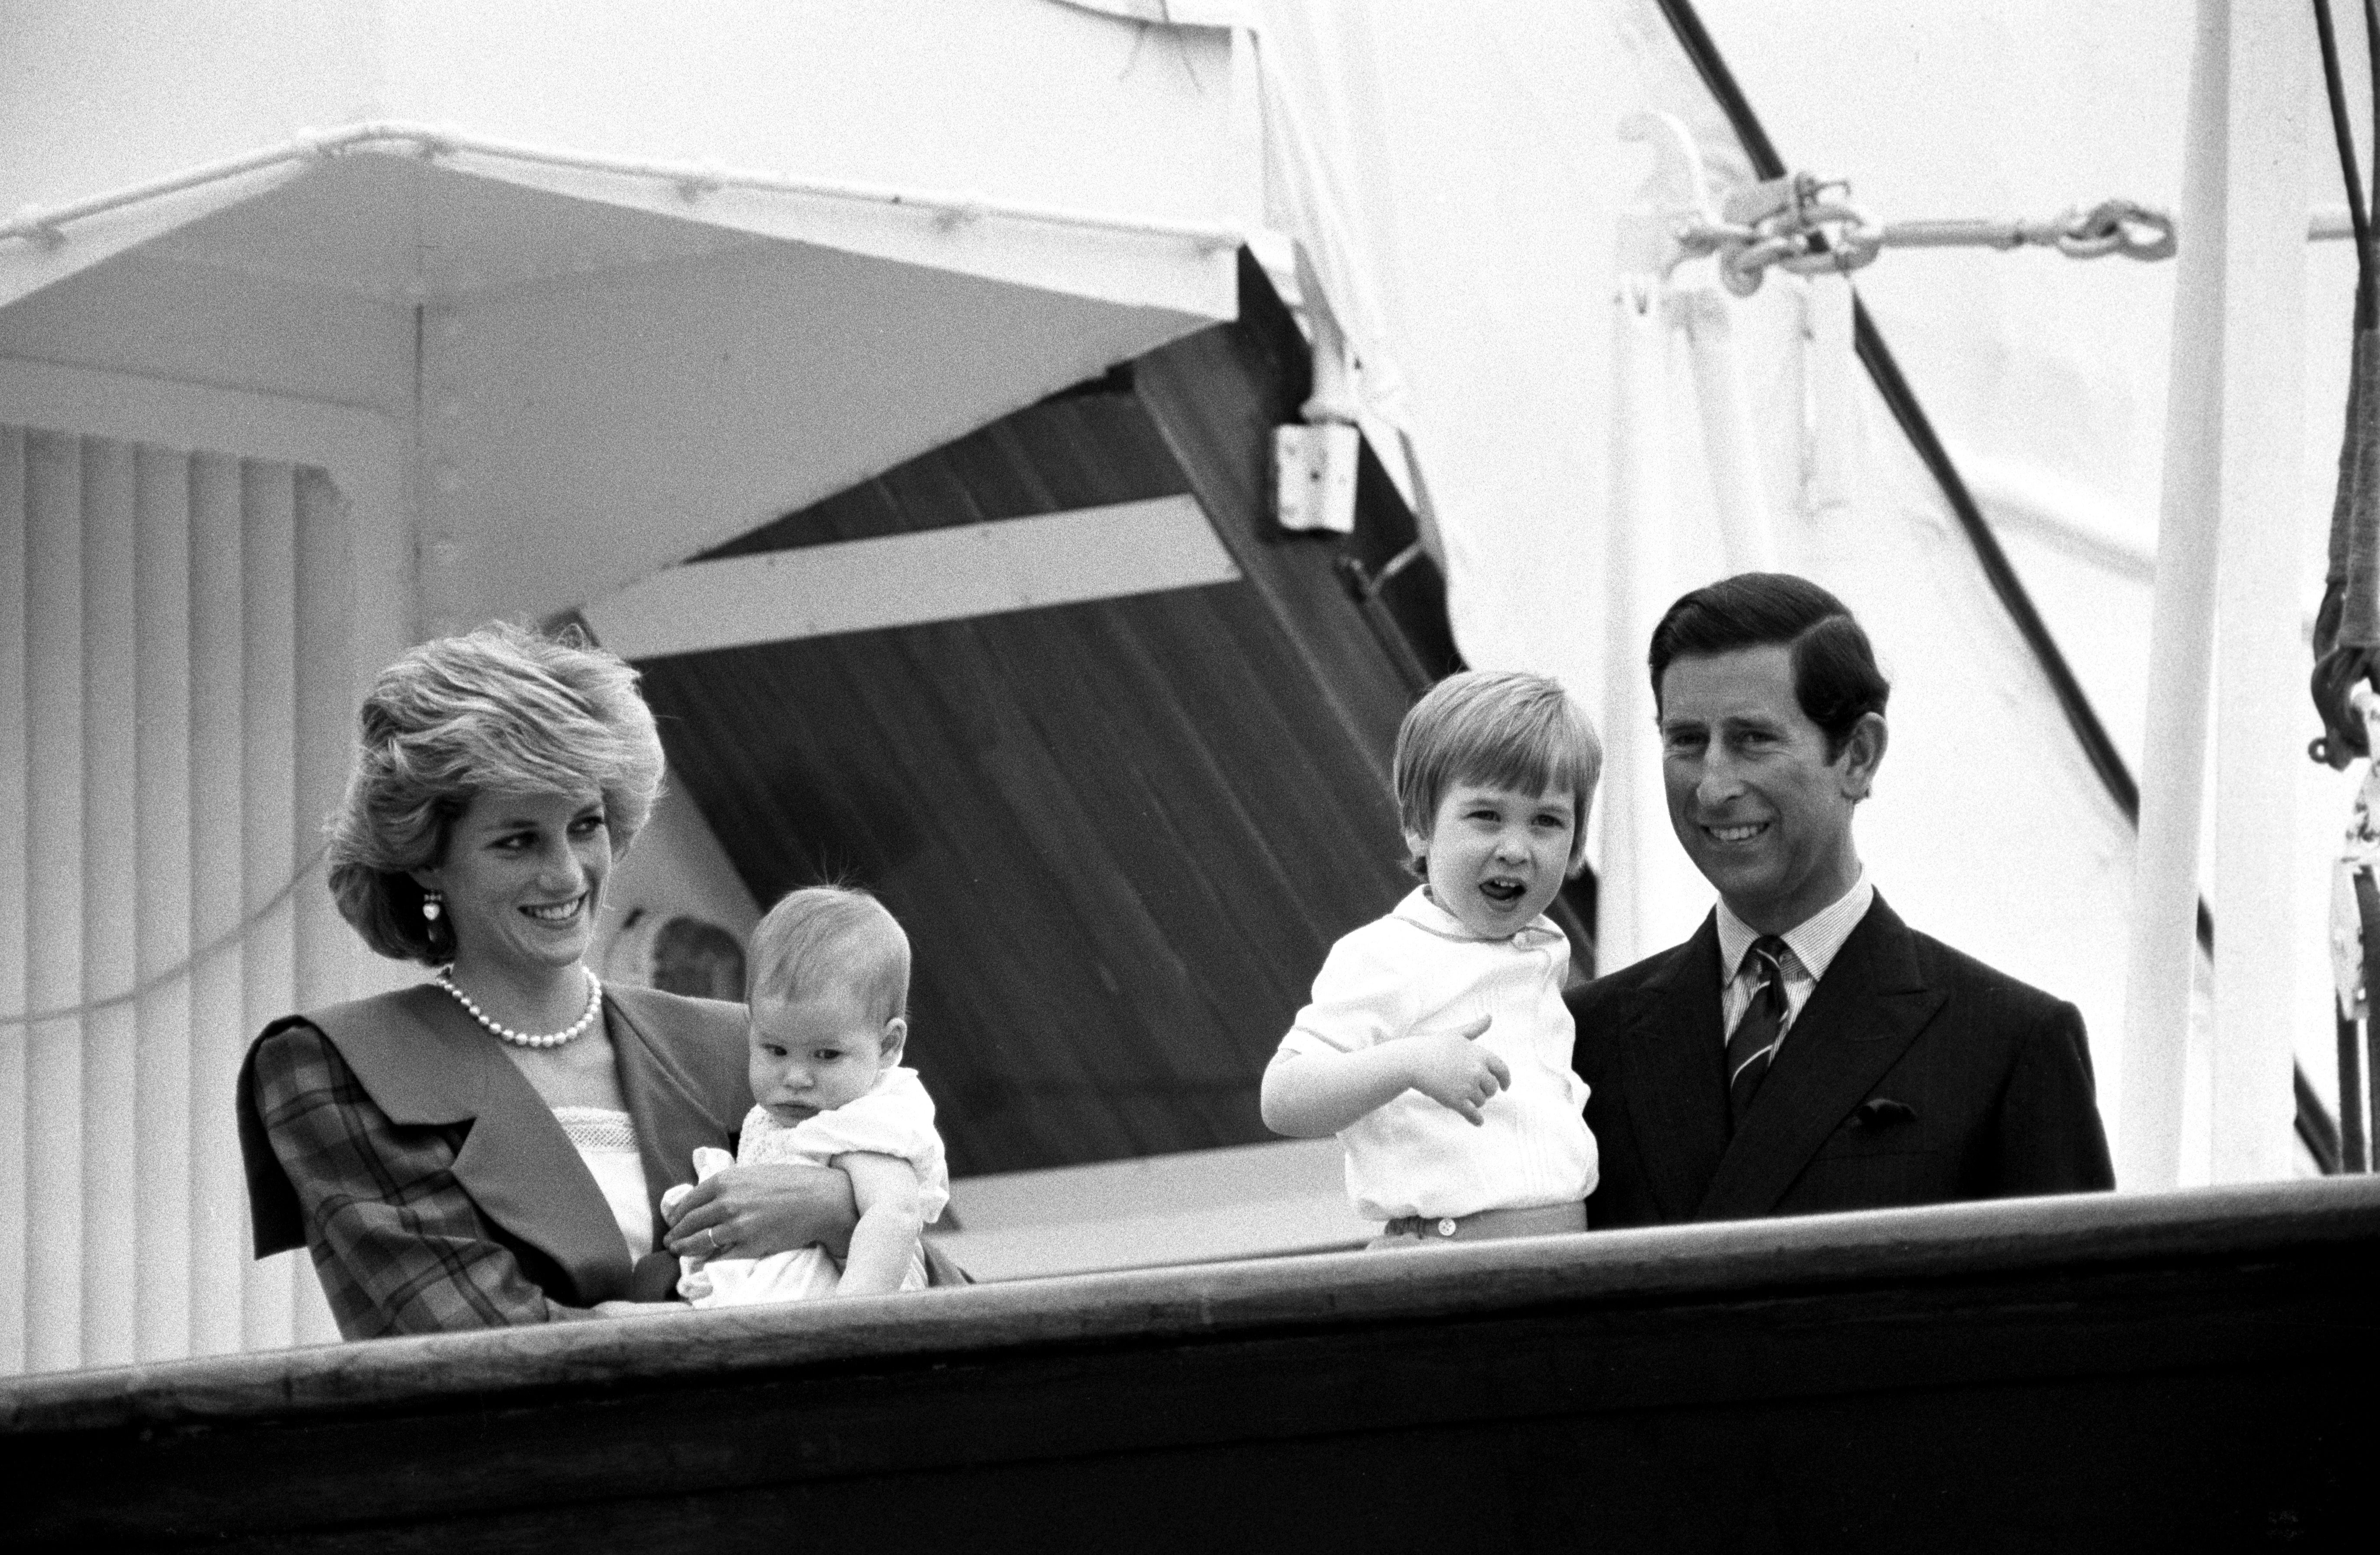 Charles and Diana are reunited with their children, Prince William and Prince Harry, aboard the Royal Yacht Britannia for a private holiday (Ron Bell/PA)